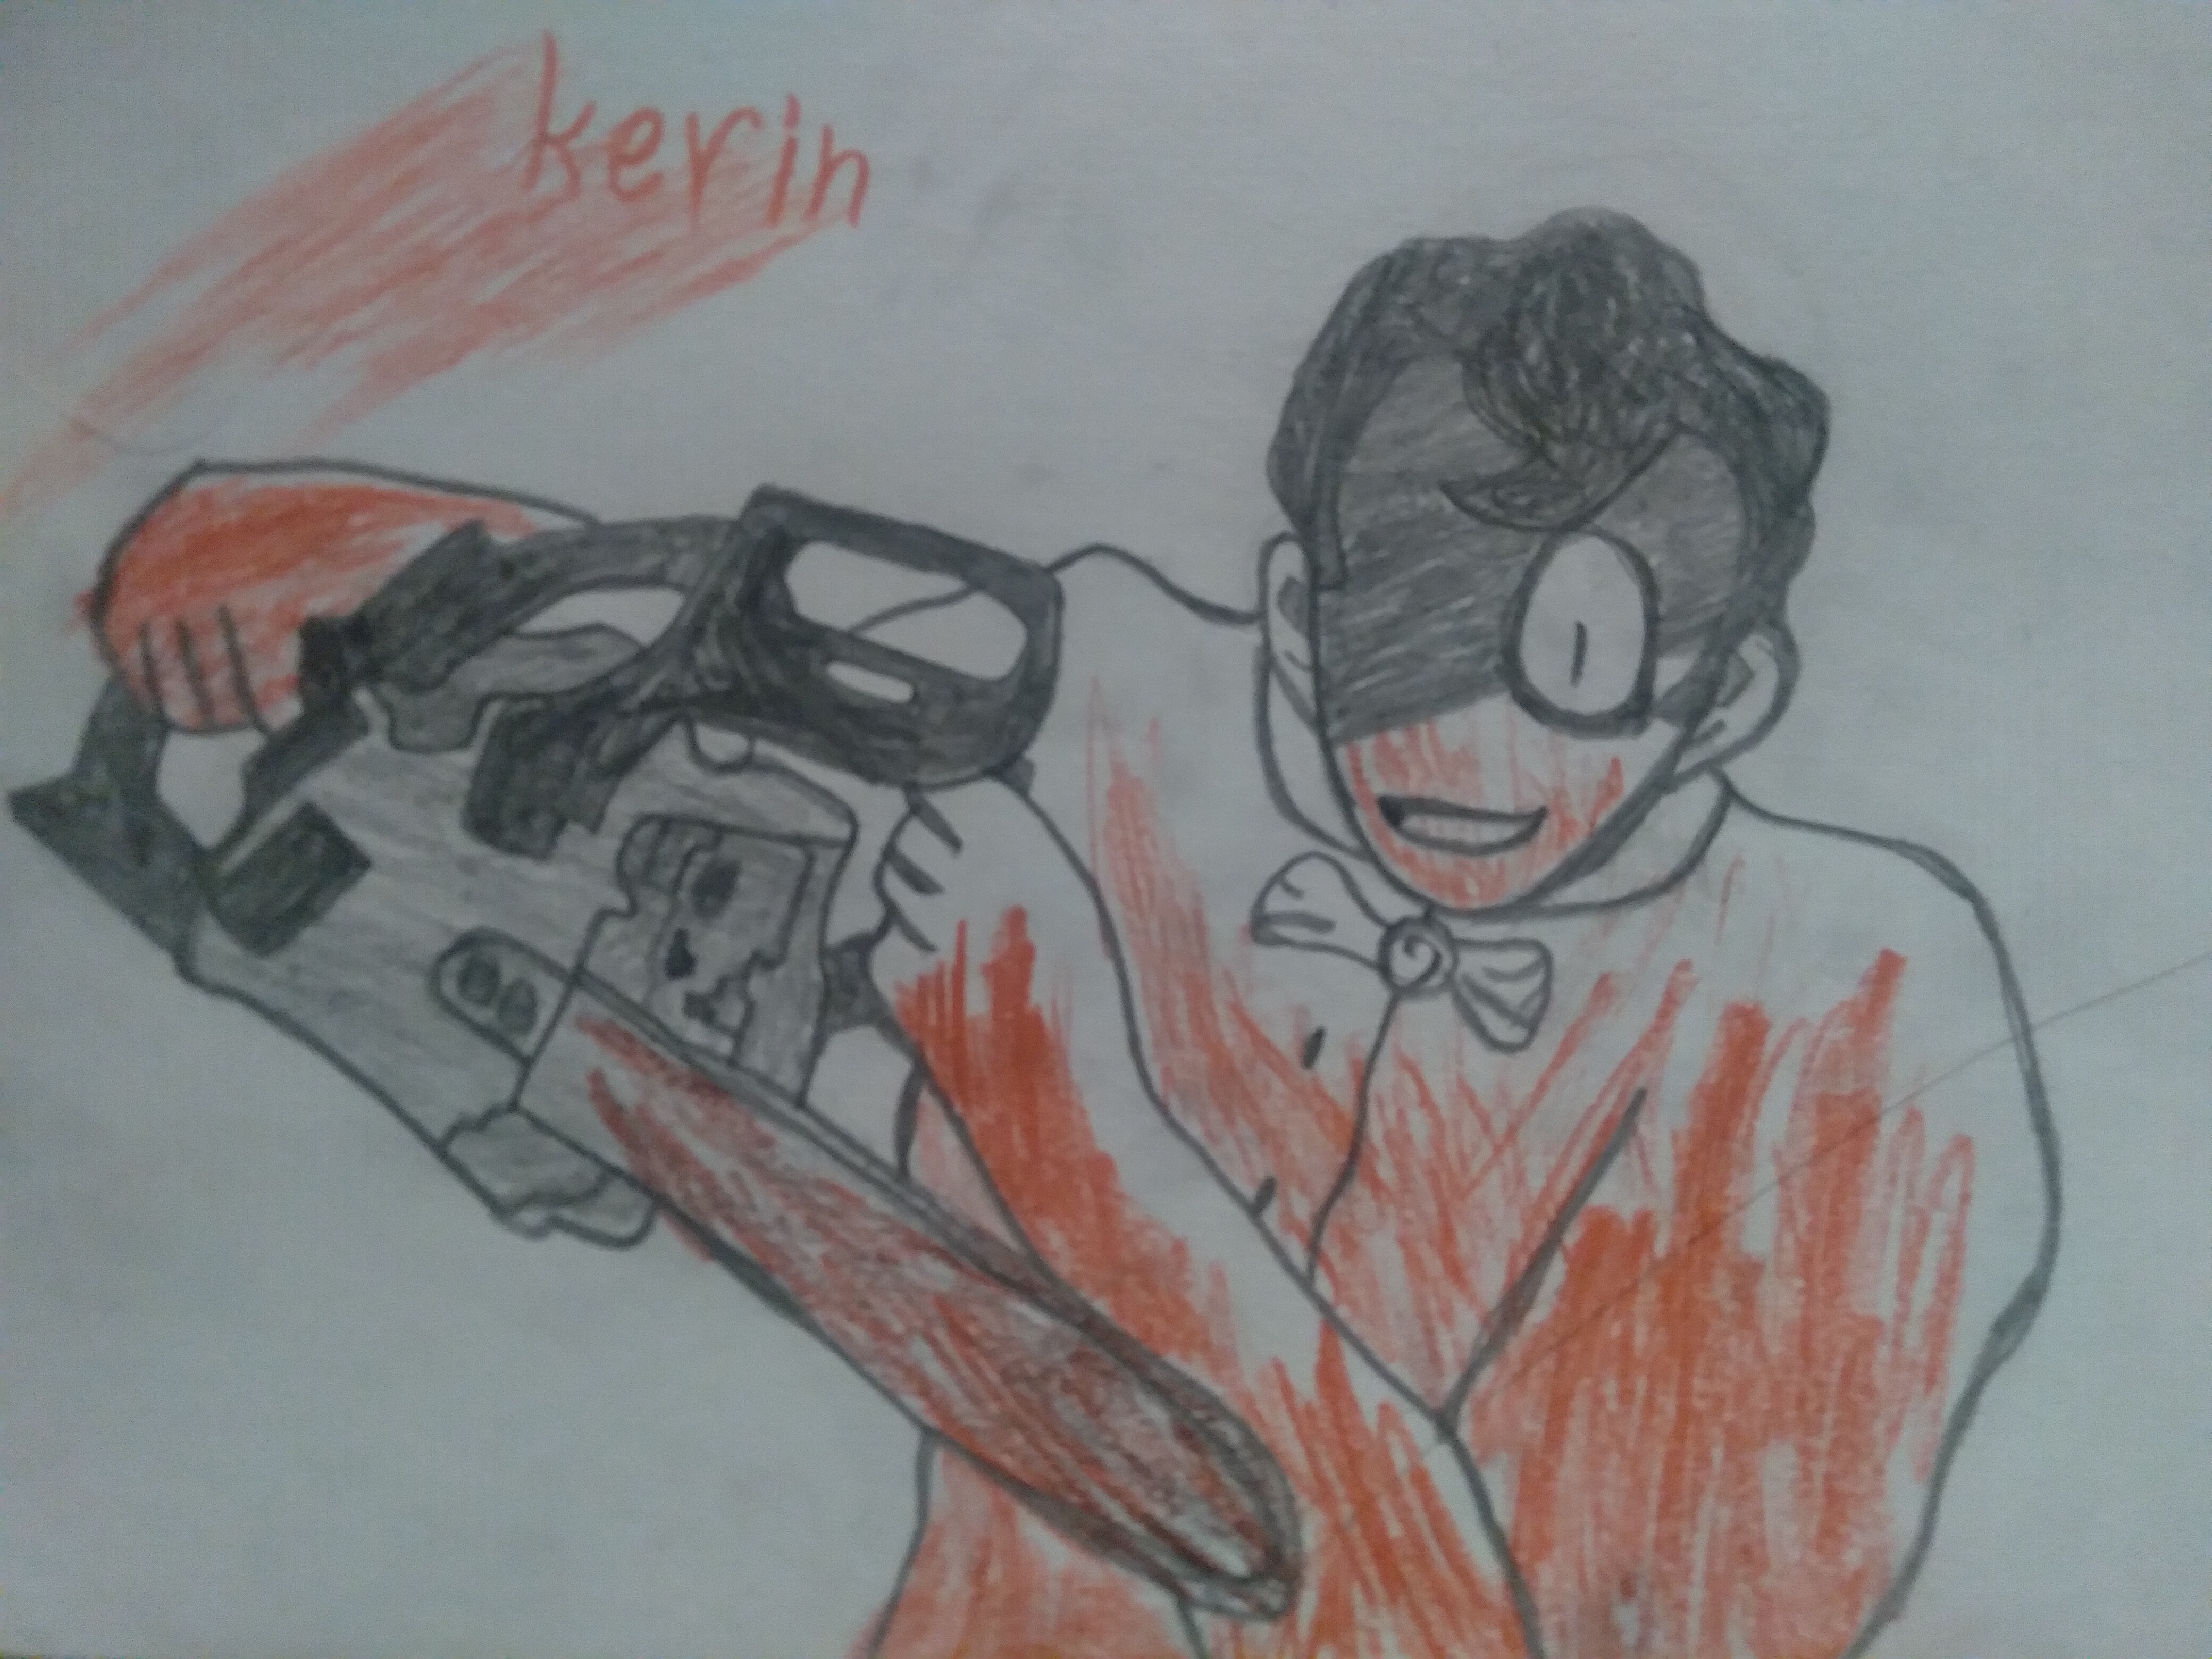 Psycho Kevin-spooky month by rckingg123 on DeviantArt